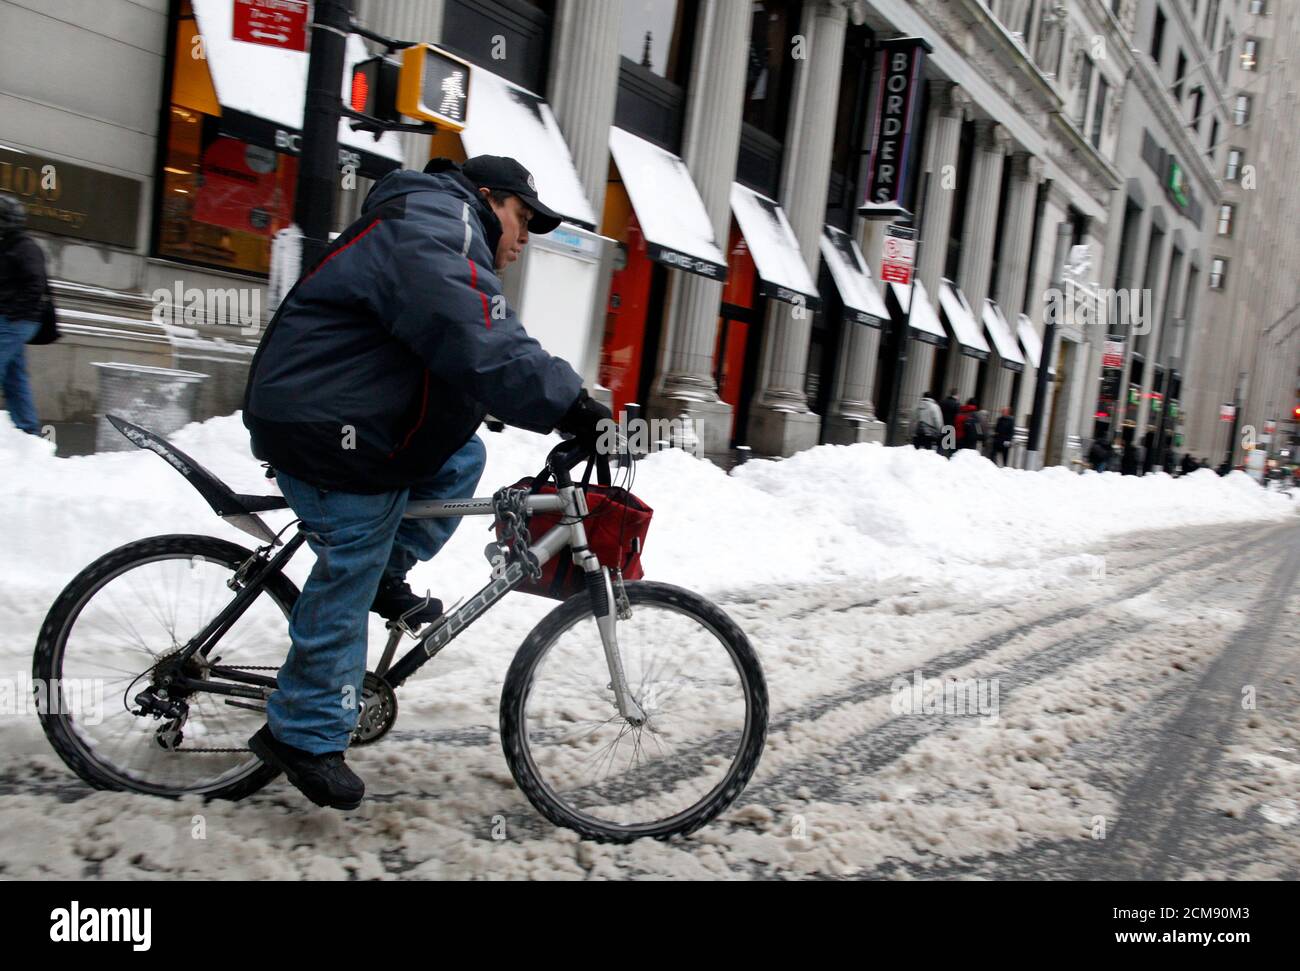 A delivery person rides his bike in the snow in New York's financial district, January 27, 2011. The Northeast dug out of yet another winter storm on Thursday that pummelled the region with between six and 19 inches of snow overnight. REUTERS/Brendan McDermid (UNITED STATES - Tags: ENVIRONMENT BUSINESS TRANSPORT) Stock Photo